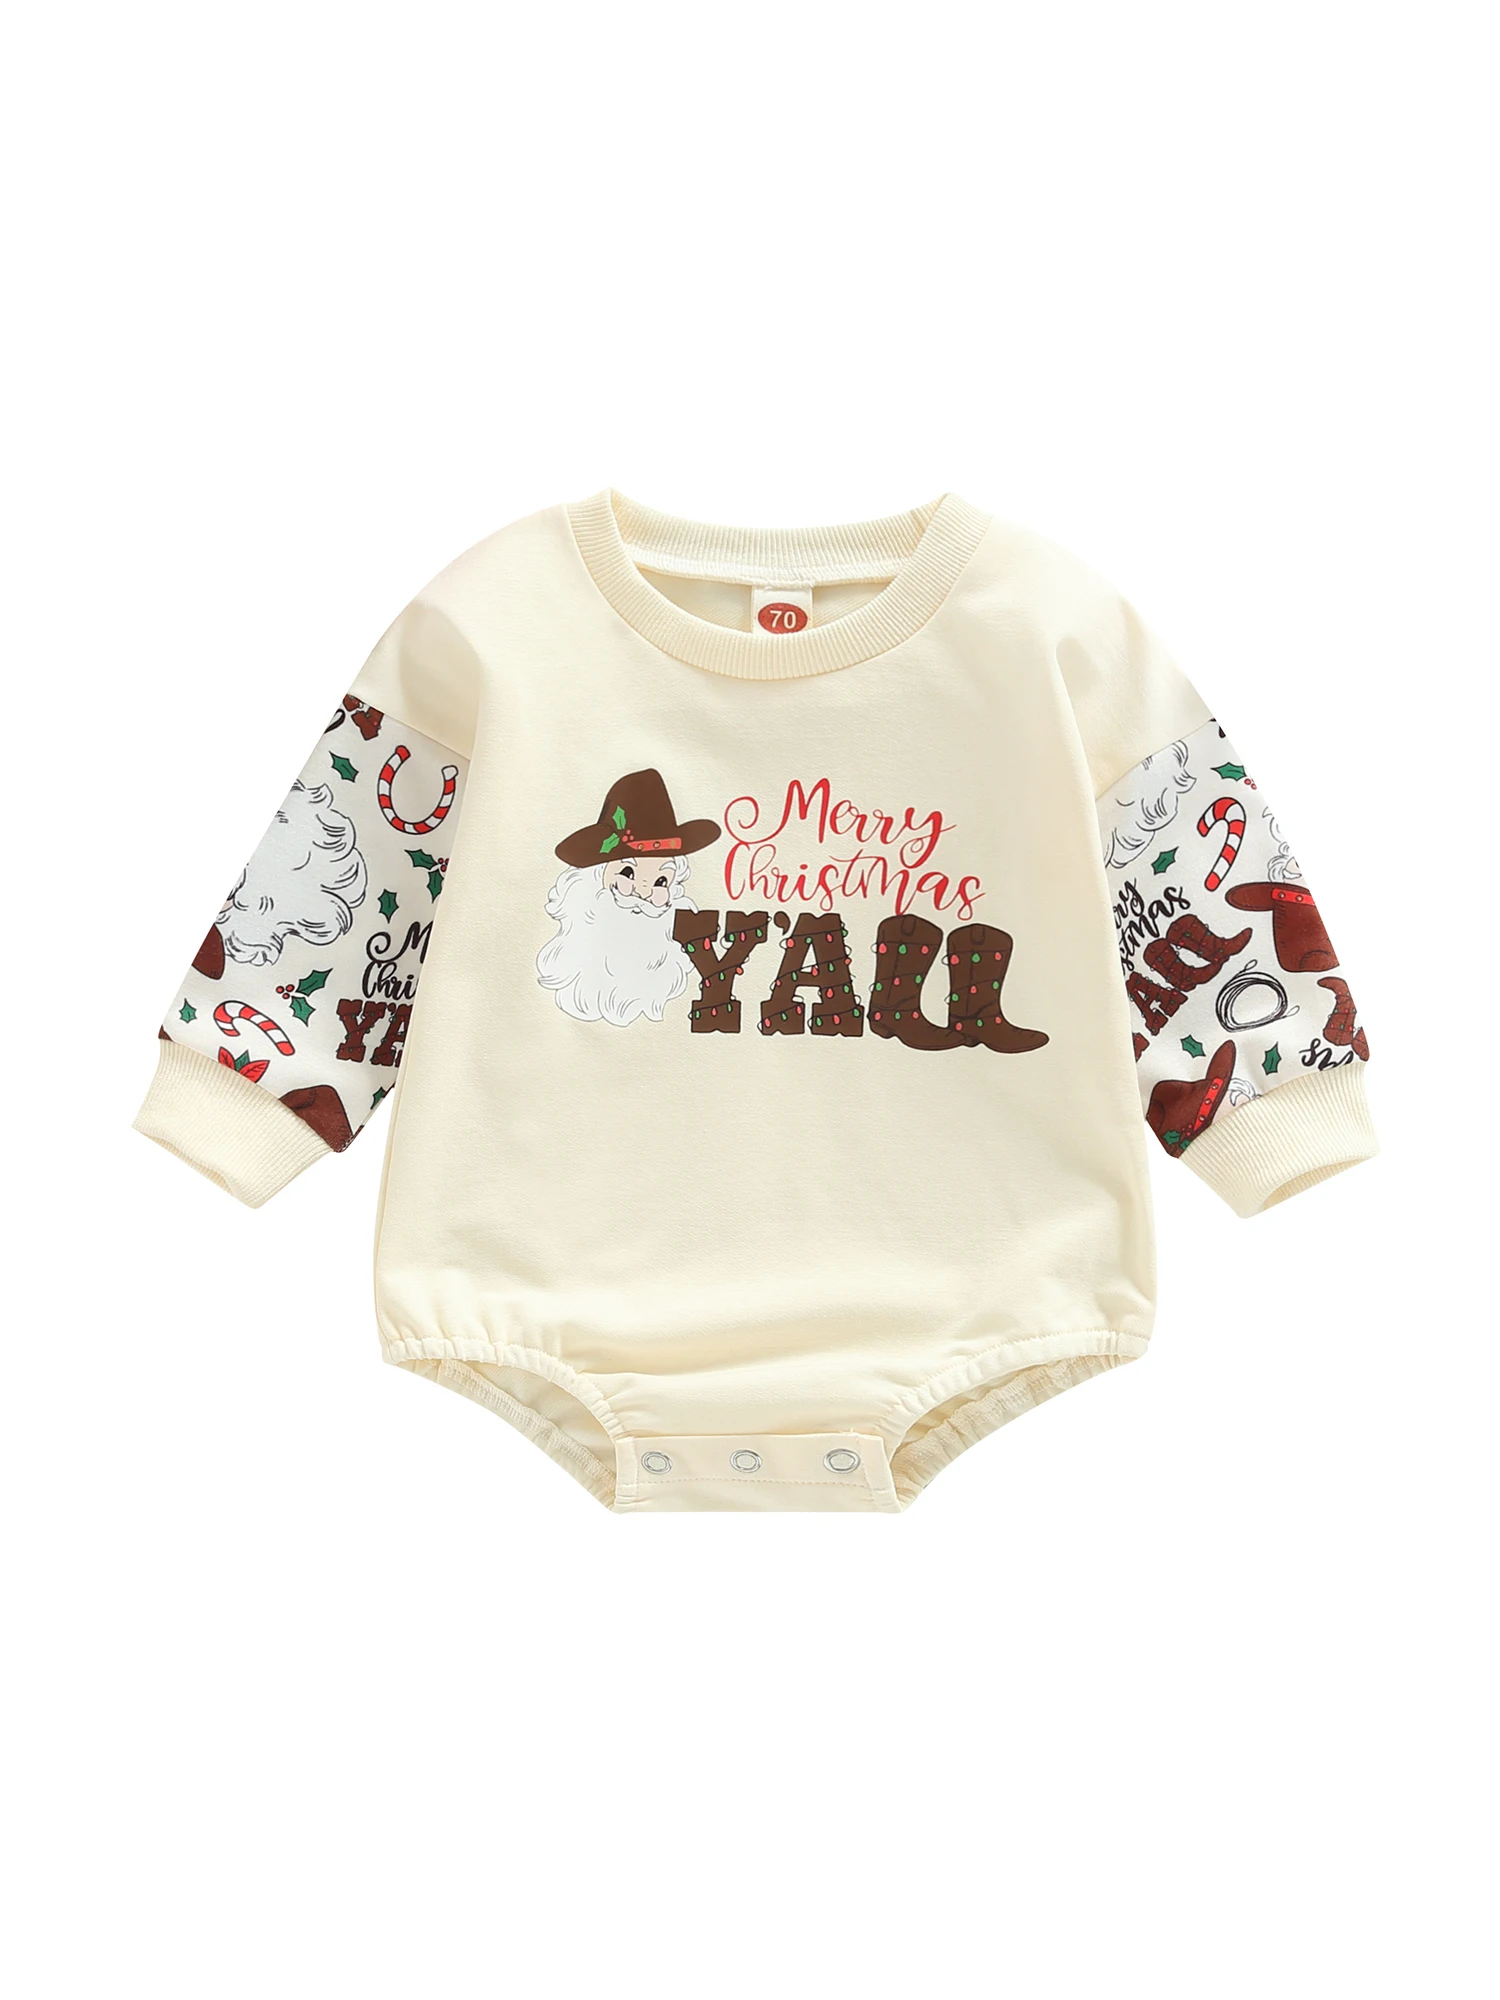 

Newborn Baby Girl Boy Christmas Outfit Santa Clause Letter Print Sweatshirt Romper My 1st Christmas Clothes